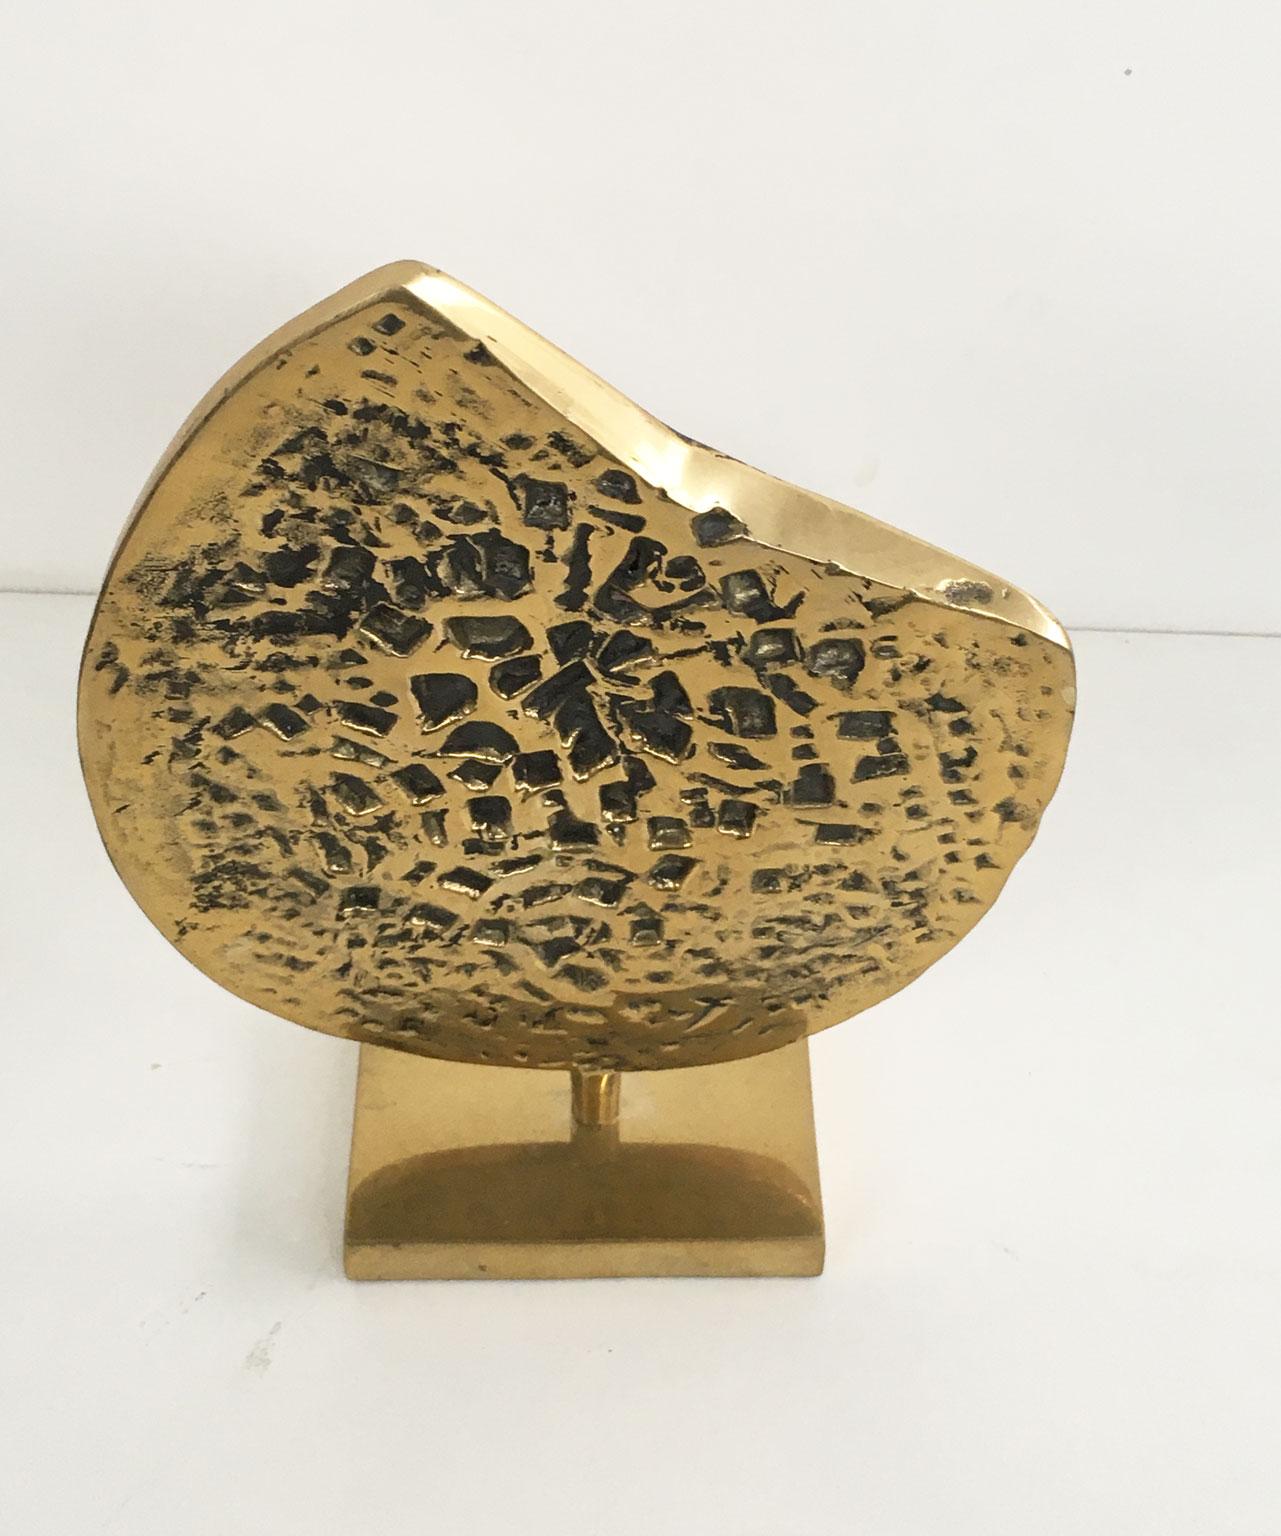 Post-Modern 1980 Italy Bronze Abstract Sculpture by Lino Tiné Albero Città City Tree For Sale